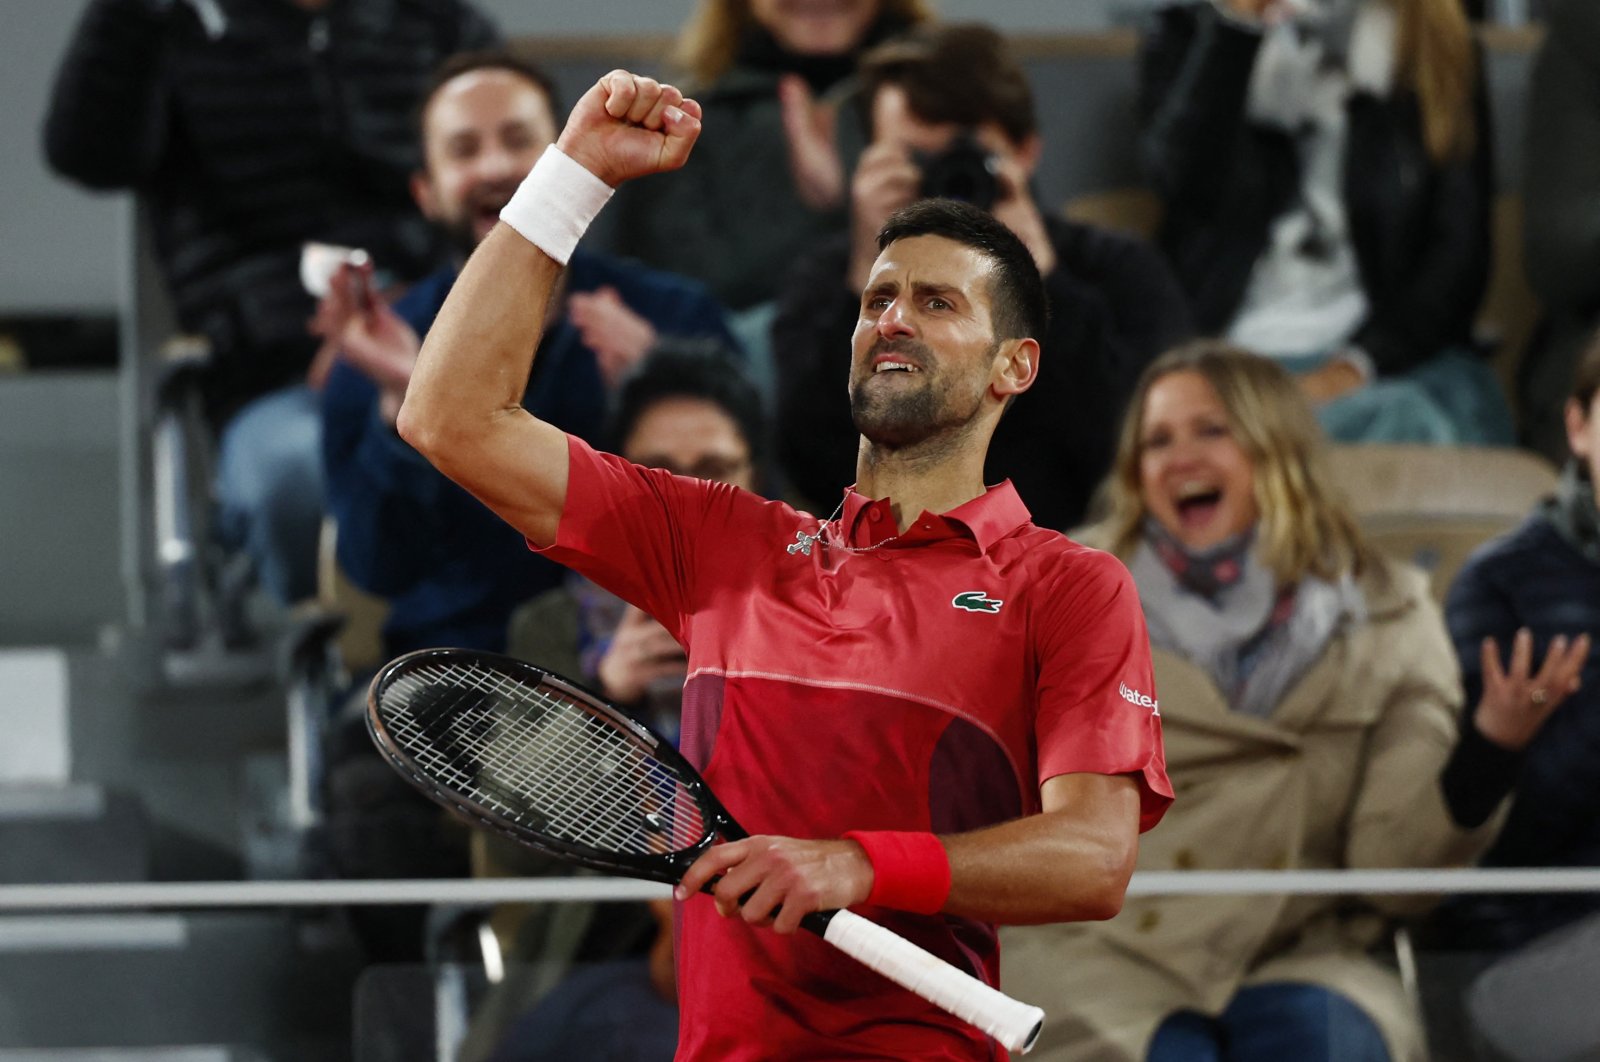 Djokovic pulls victory from jaws of defeat in French Open thriller